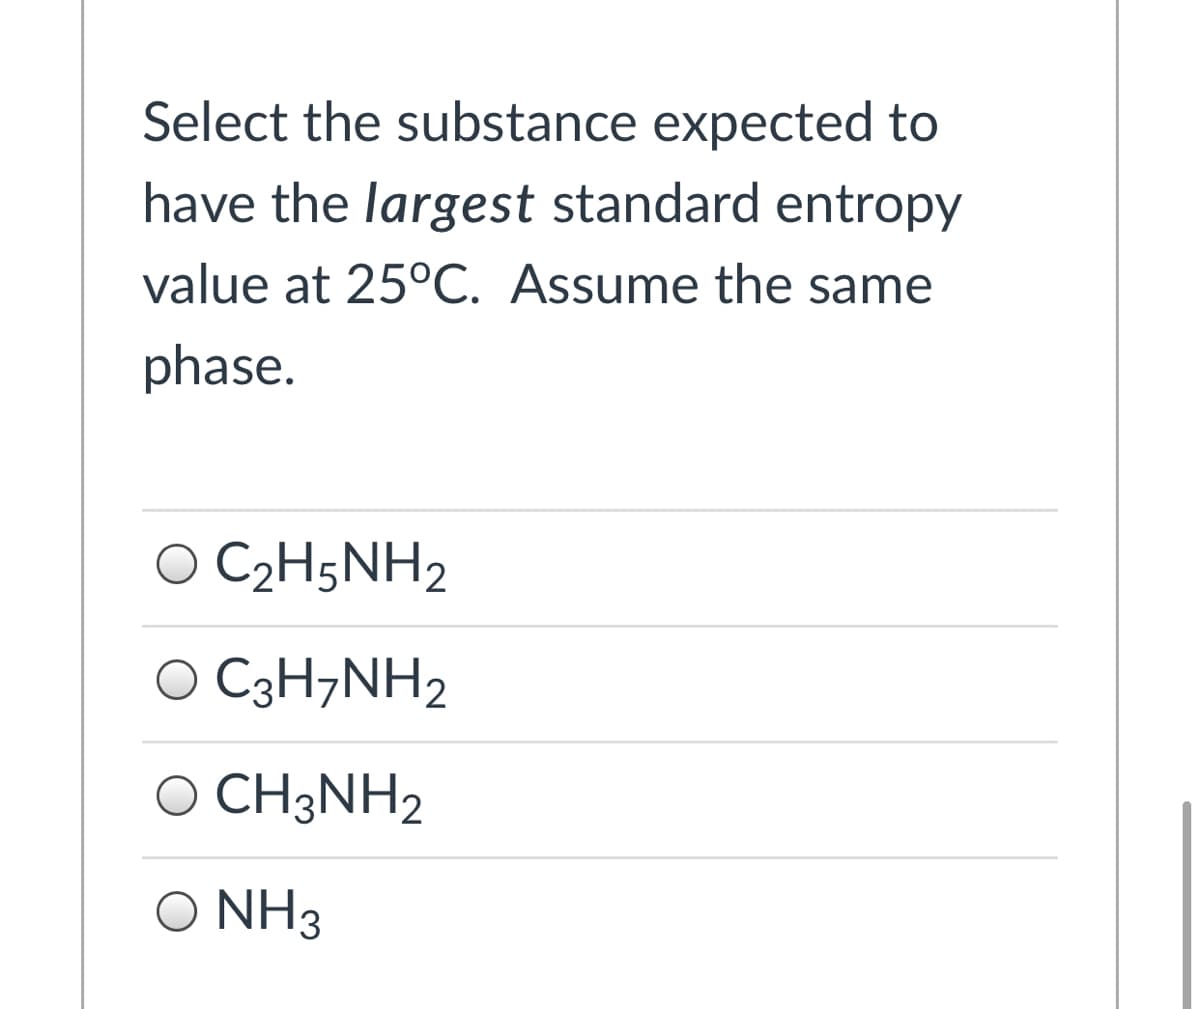 Select the substance expected to
have the largest standard entropy
value at 25°C. Assume the same
phase.
O C2H5NH2
O C3H7NH2
O CH3NH2
O NH3
